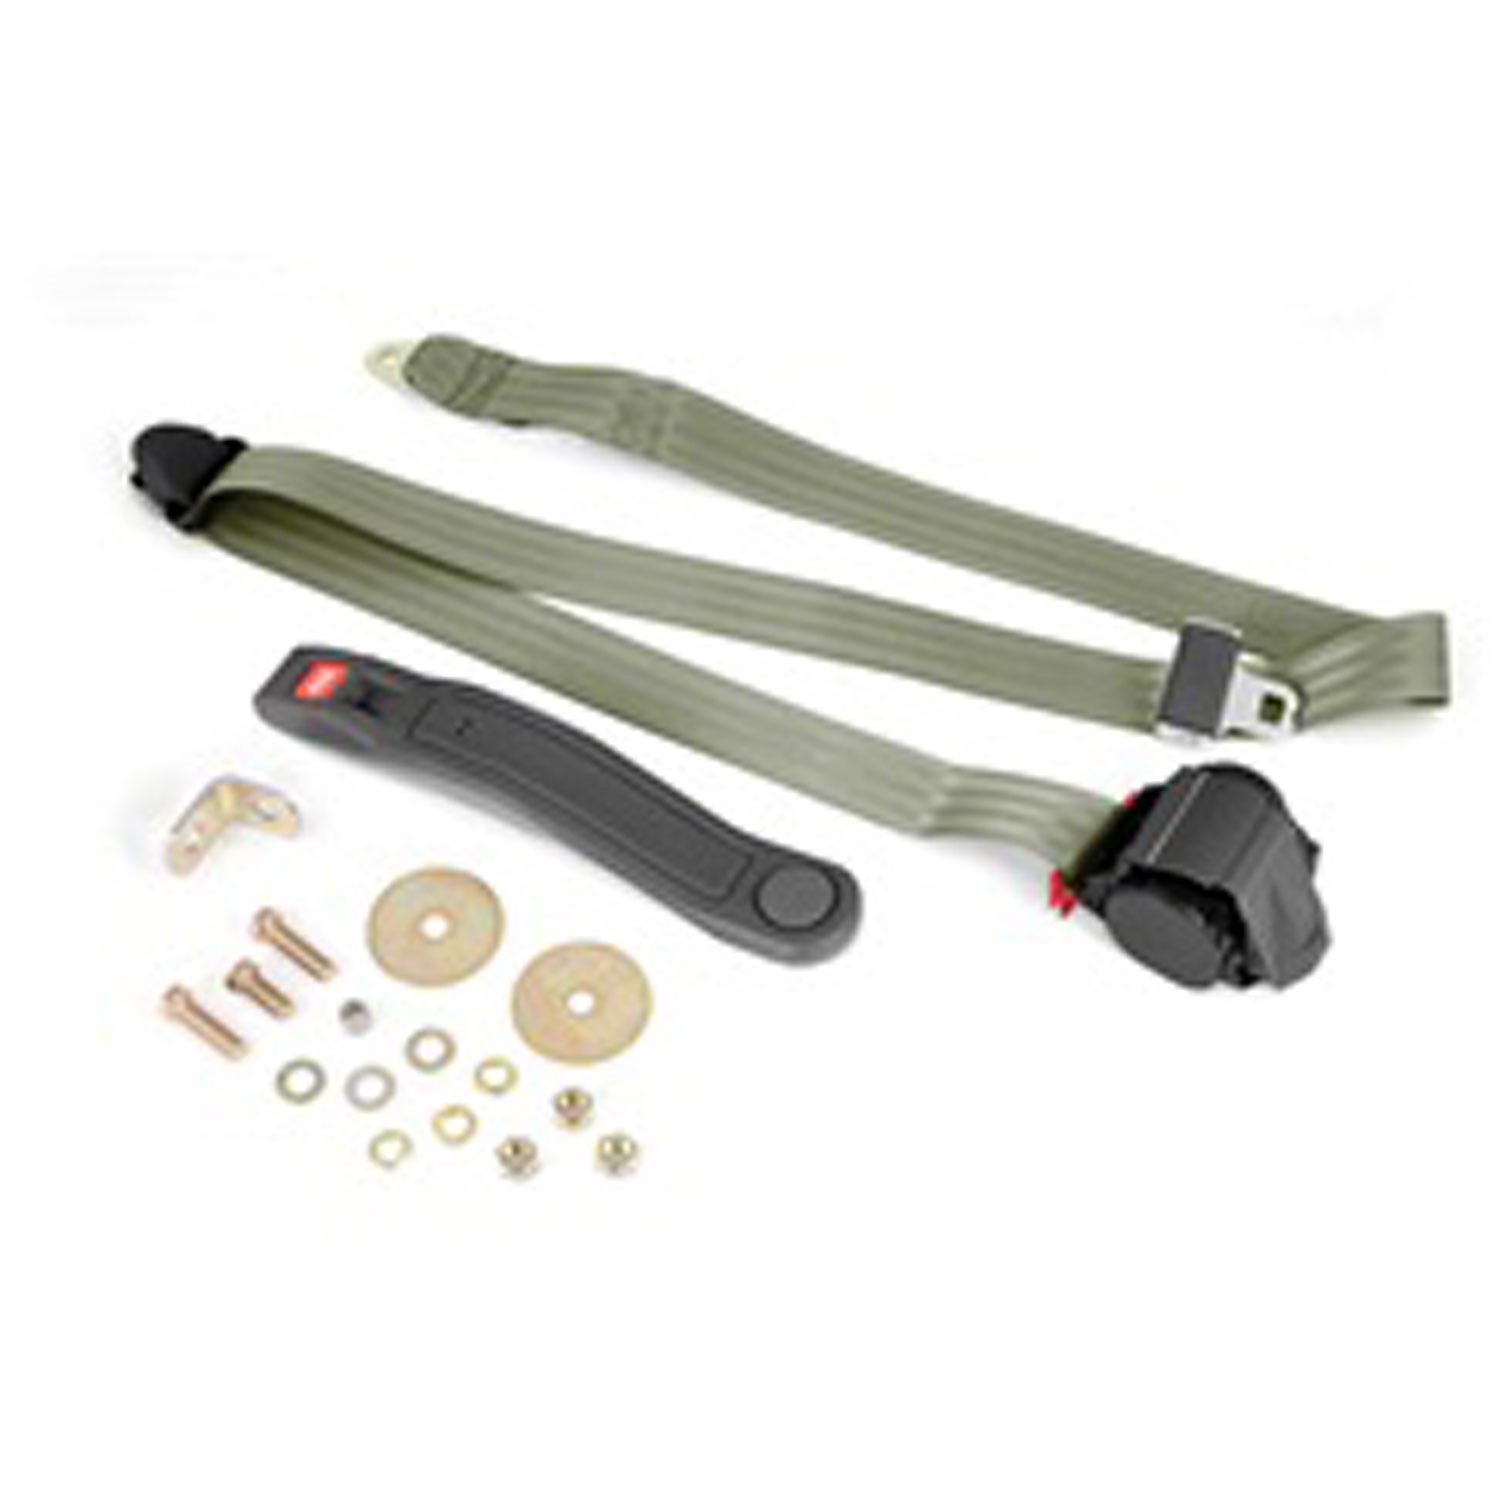 This olive drab 3-point retractable seat belt from